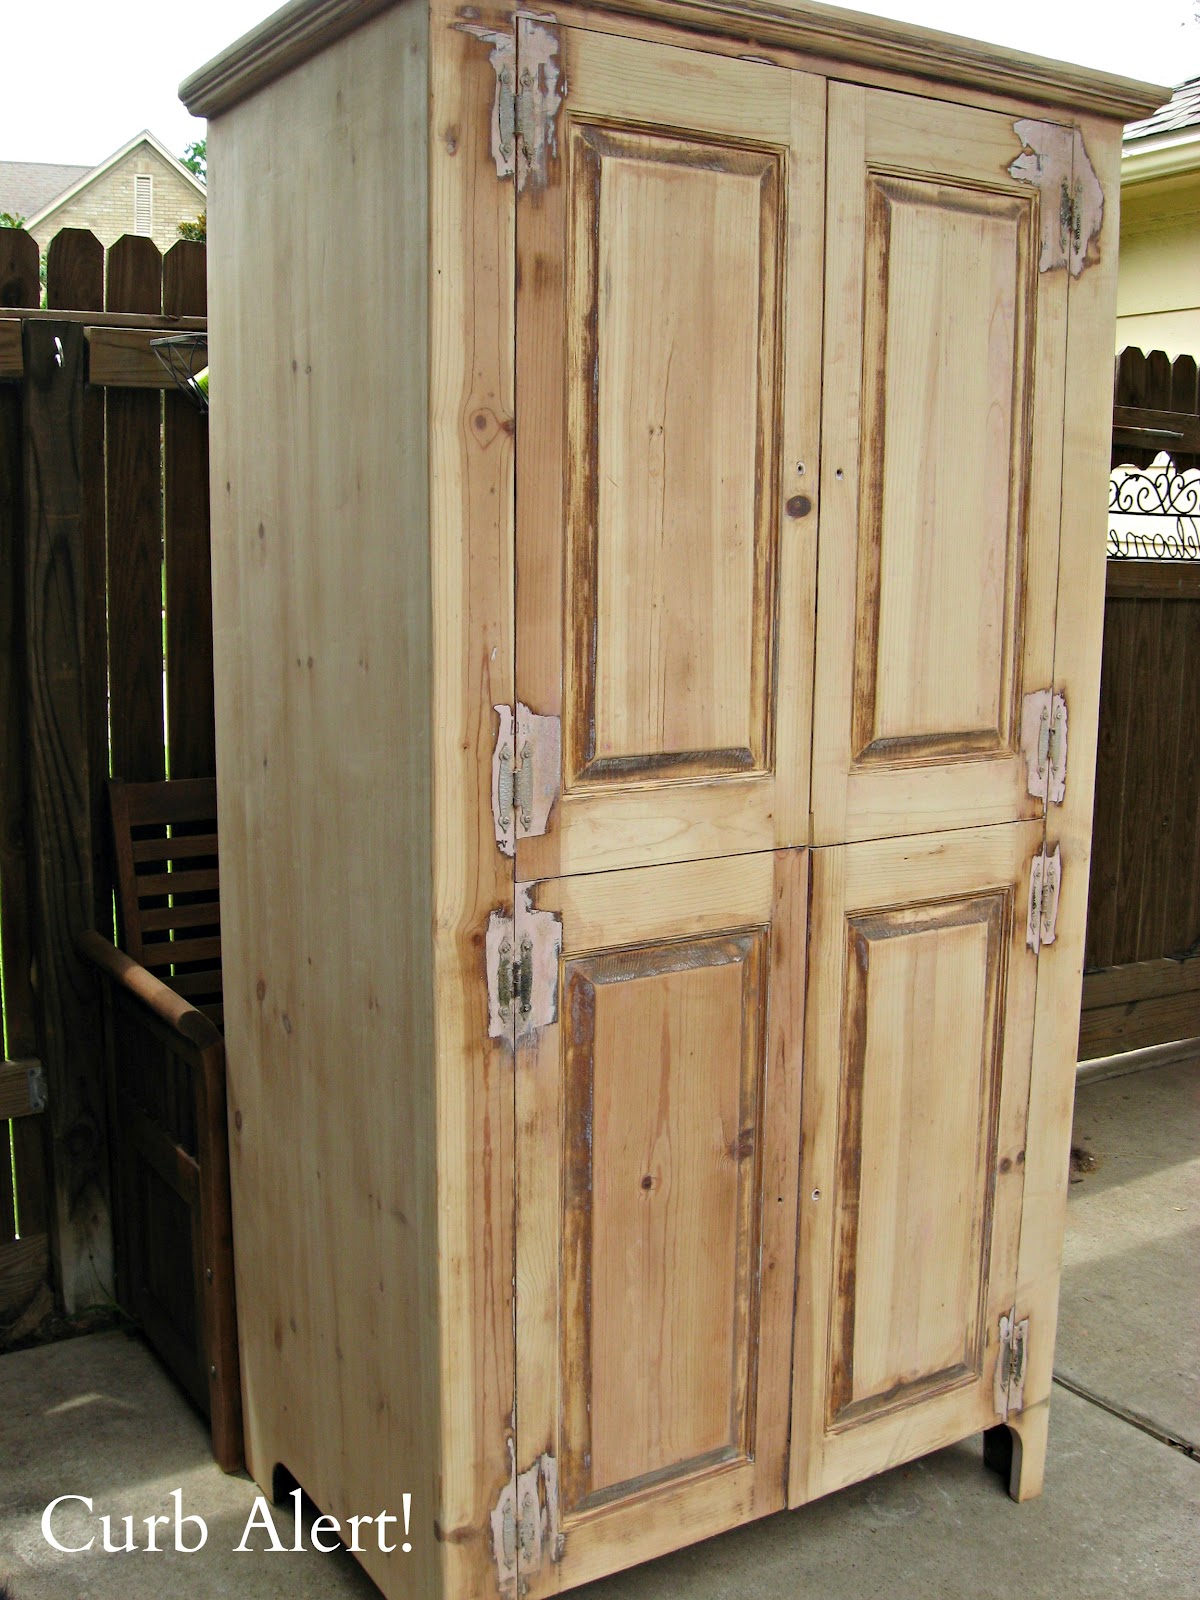  ://www.howtospecialist.com/finishes/how-to-build-an-armoire-wardrobe